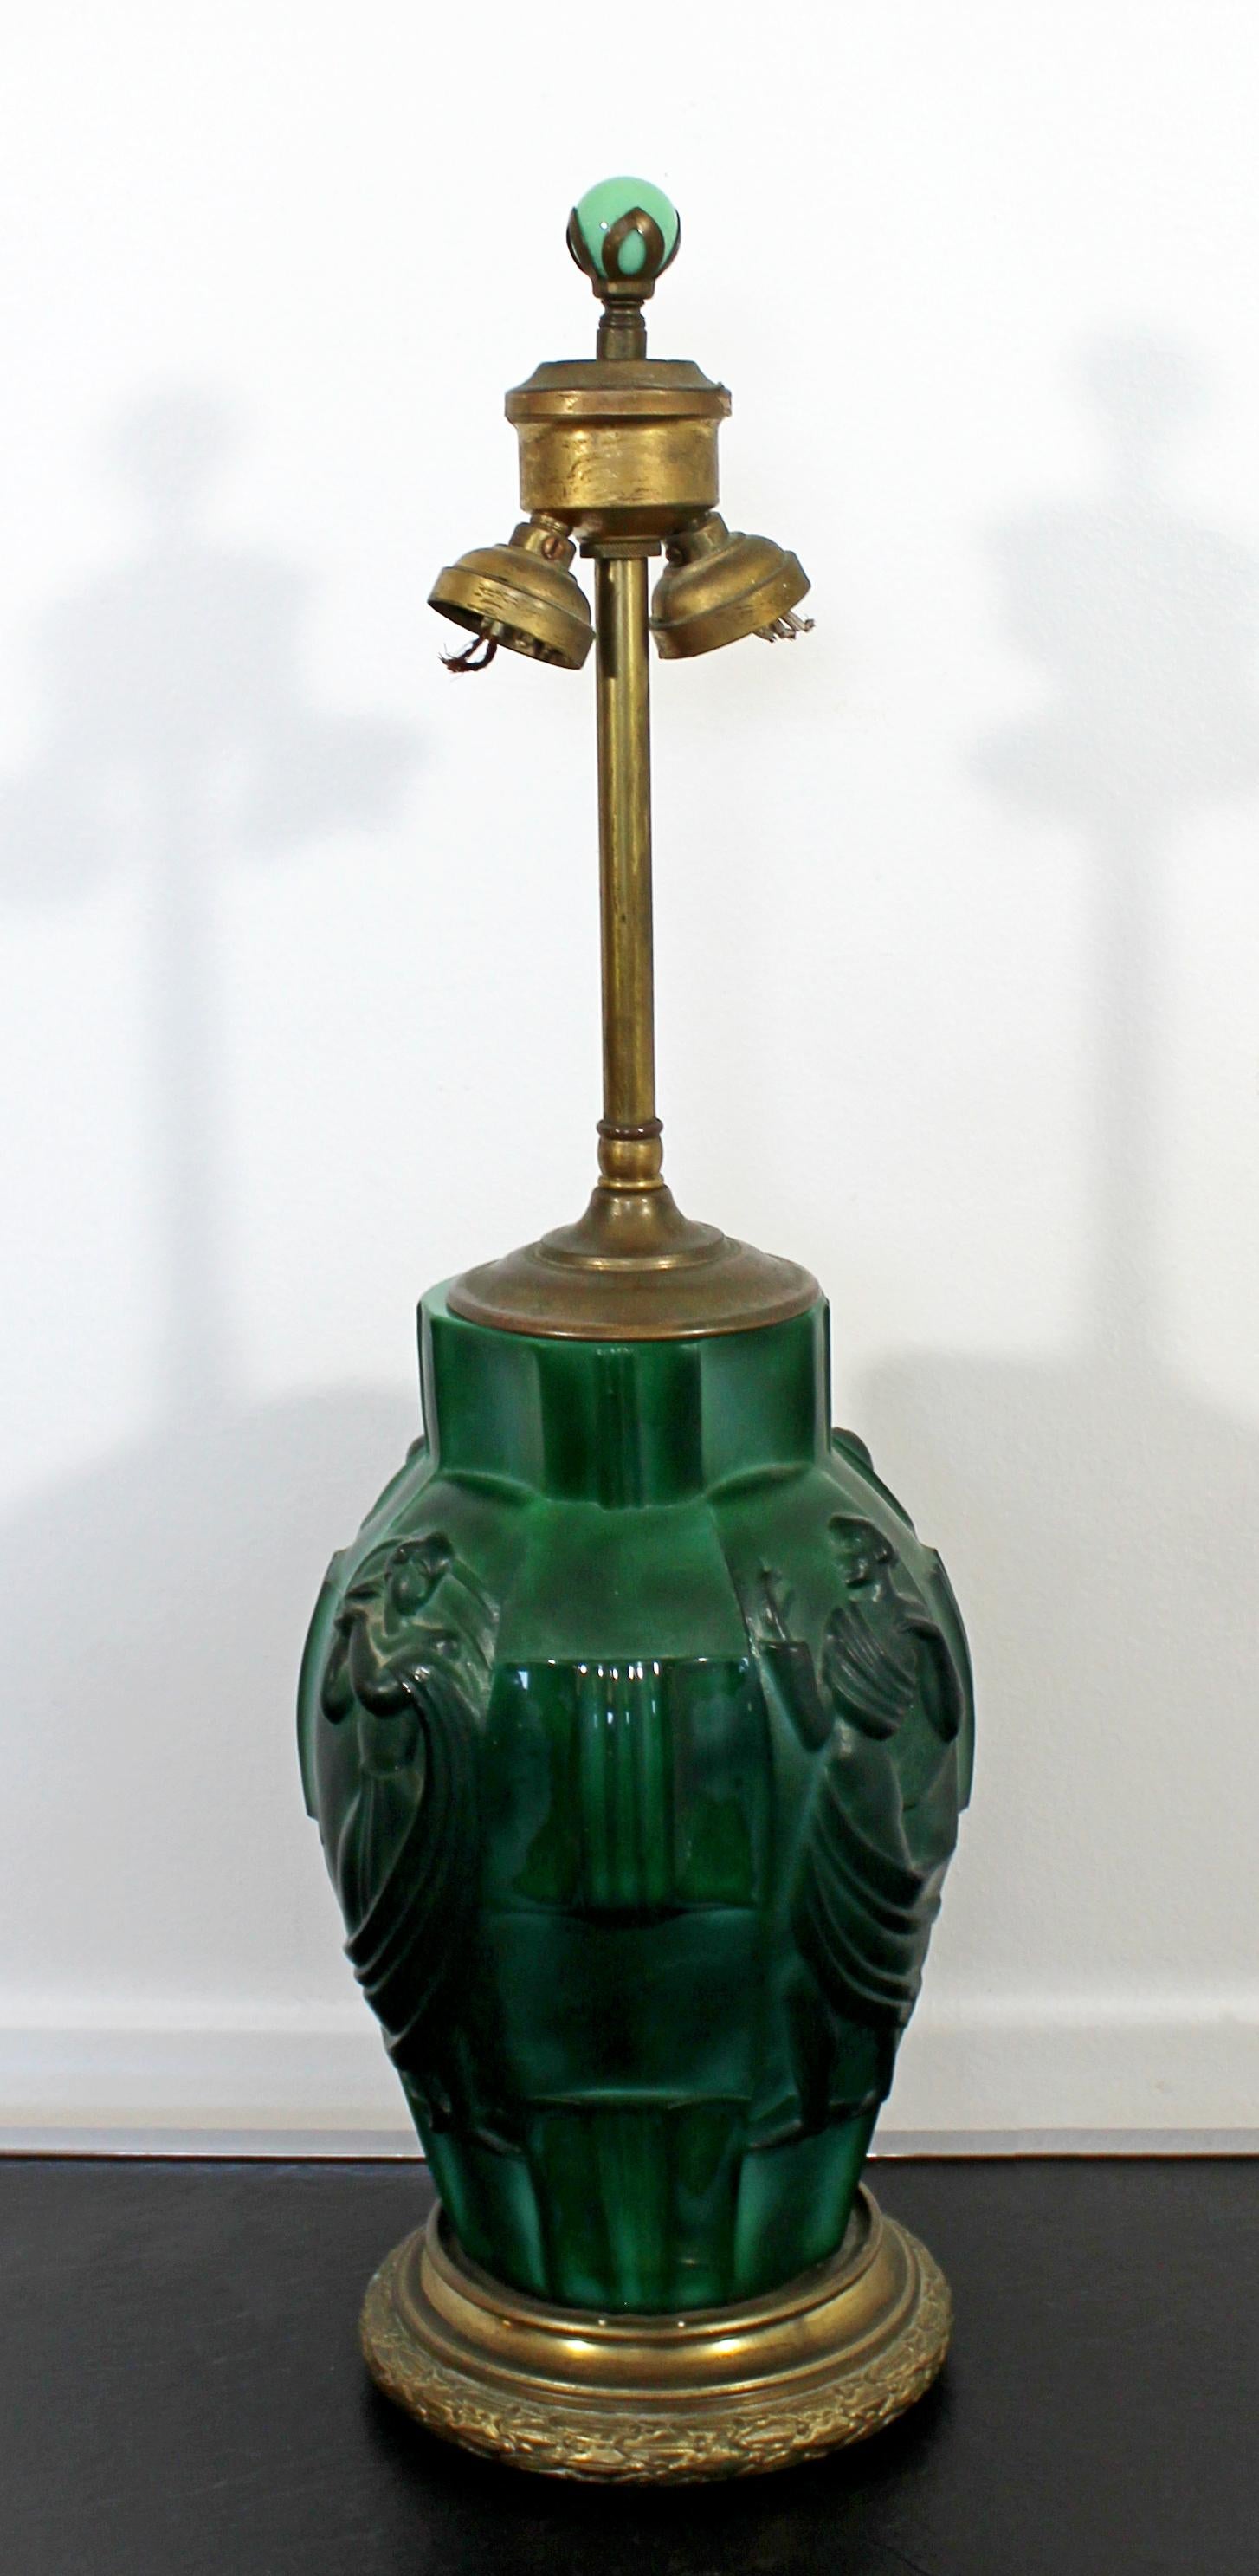 For your consideration is a breathtaking, bronze and malachite glass table lamp, by Curt Schlevogt, made in Czechoslovakia, circa 1930s. In very good antique condition. The dimensions are 6